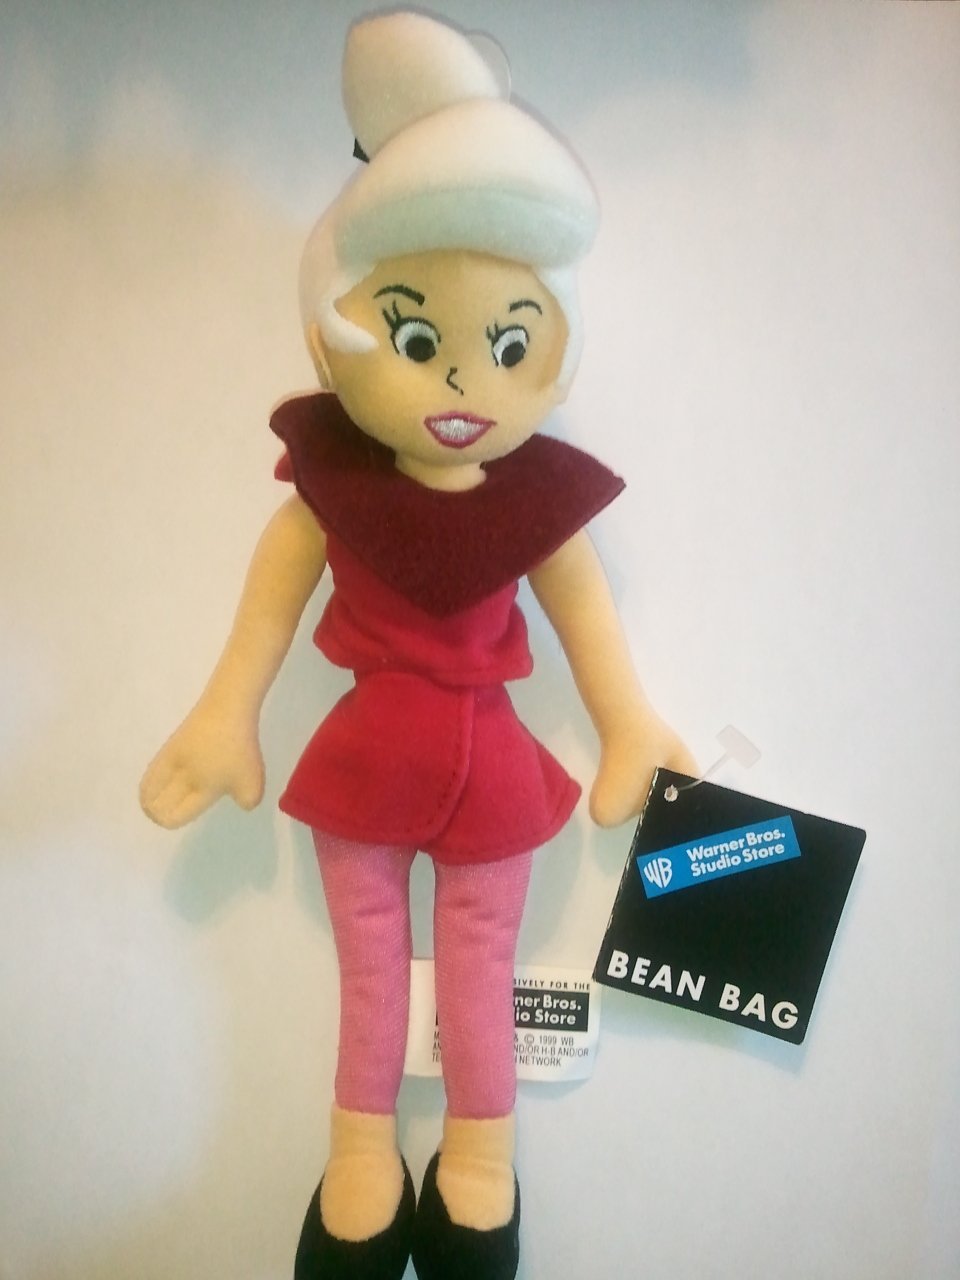 Plush Judy Jetson Doll
- made for Warner Brothers Studio Store